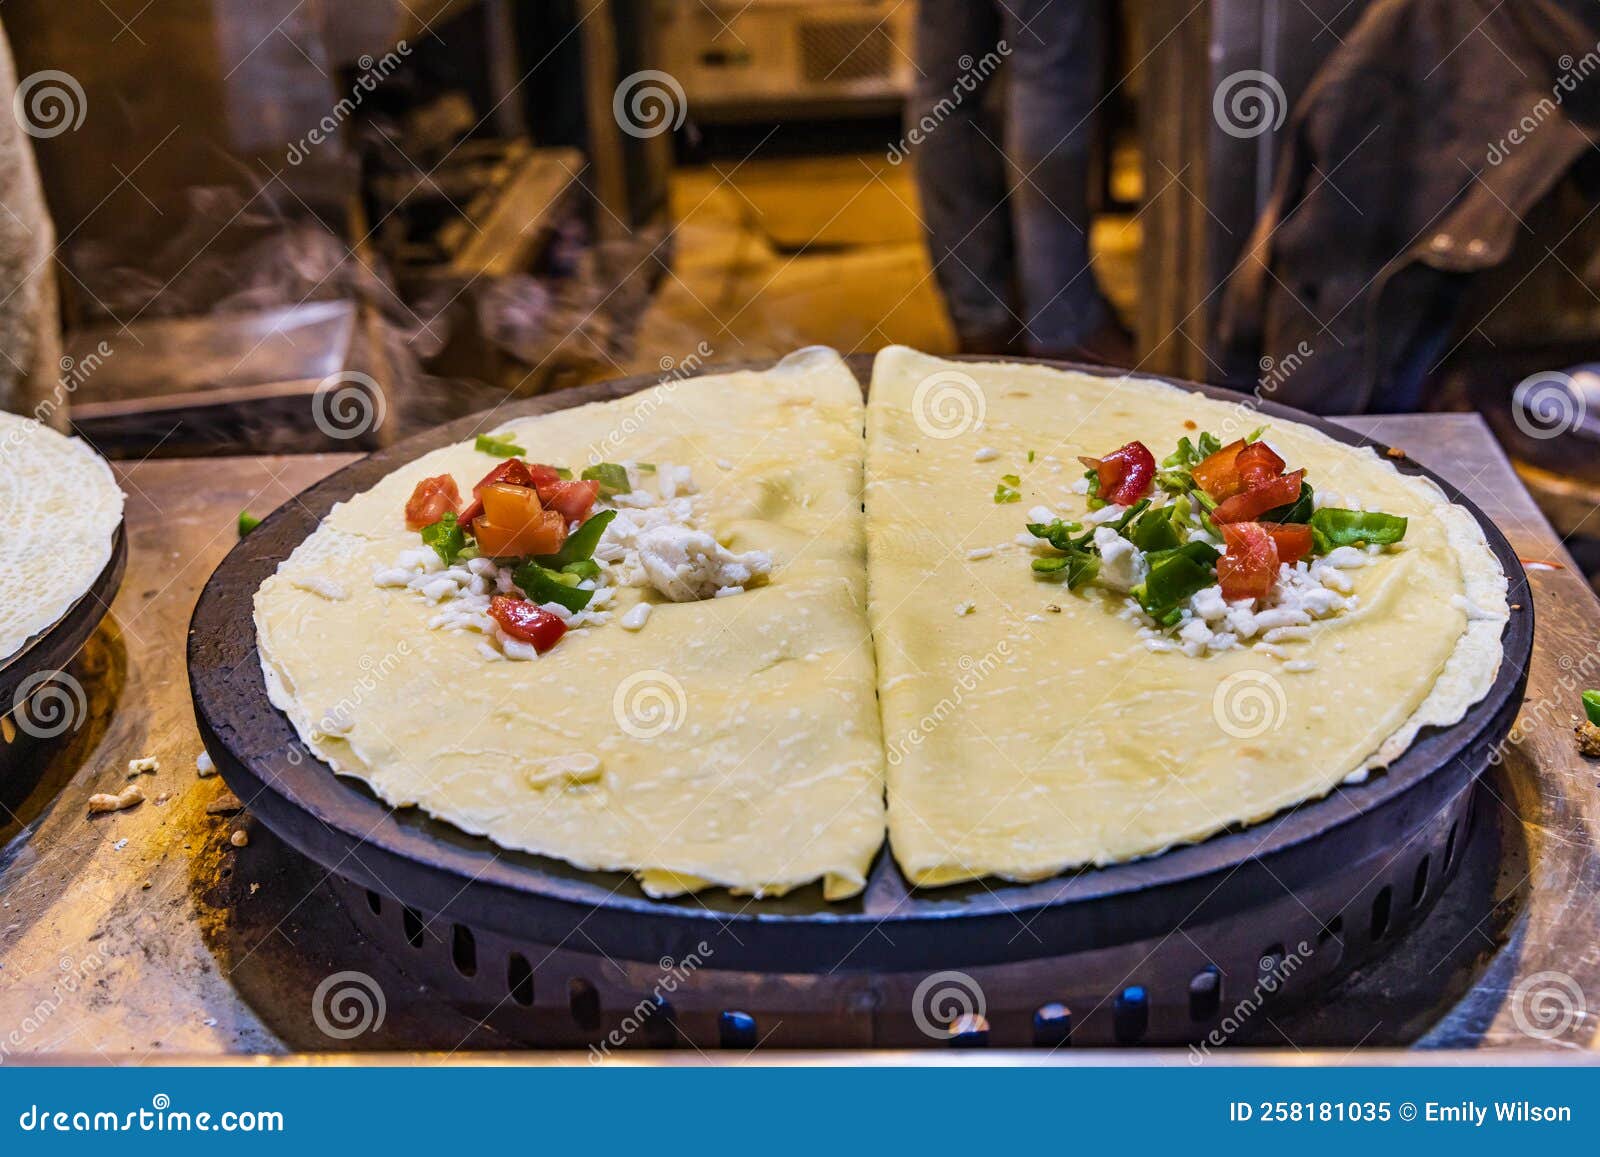 crepes being made at a shop on el moez street in old cairo